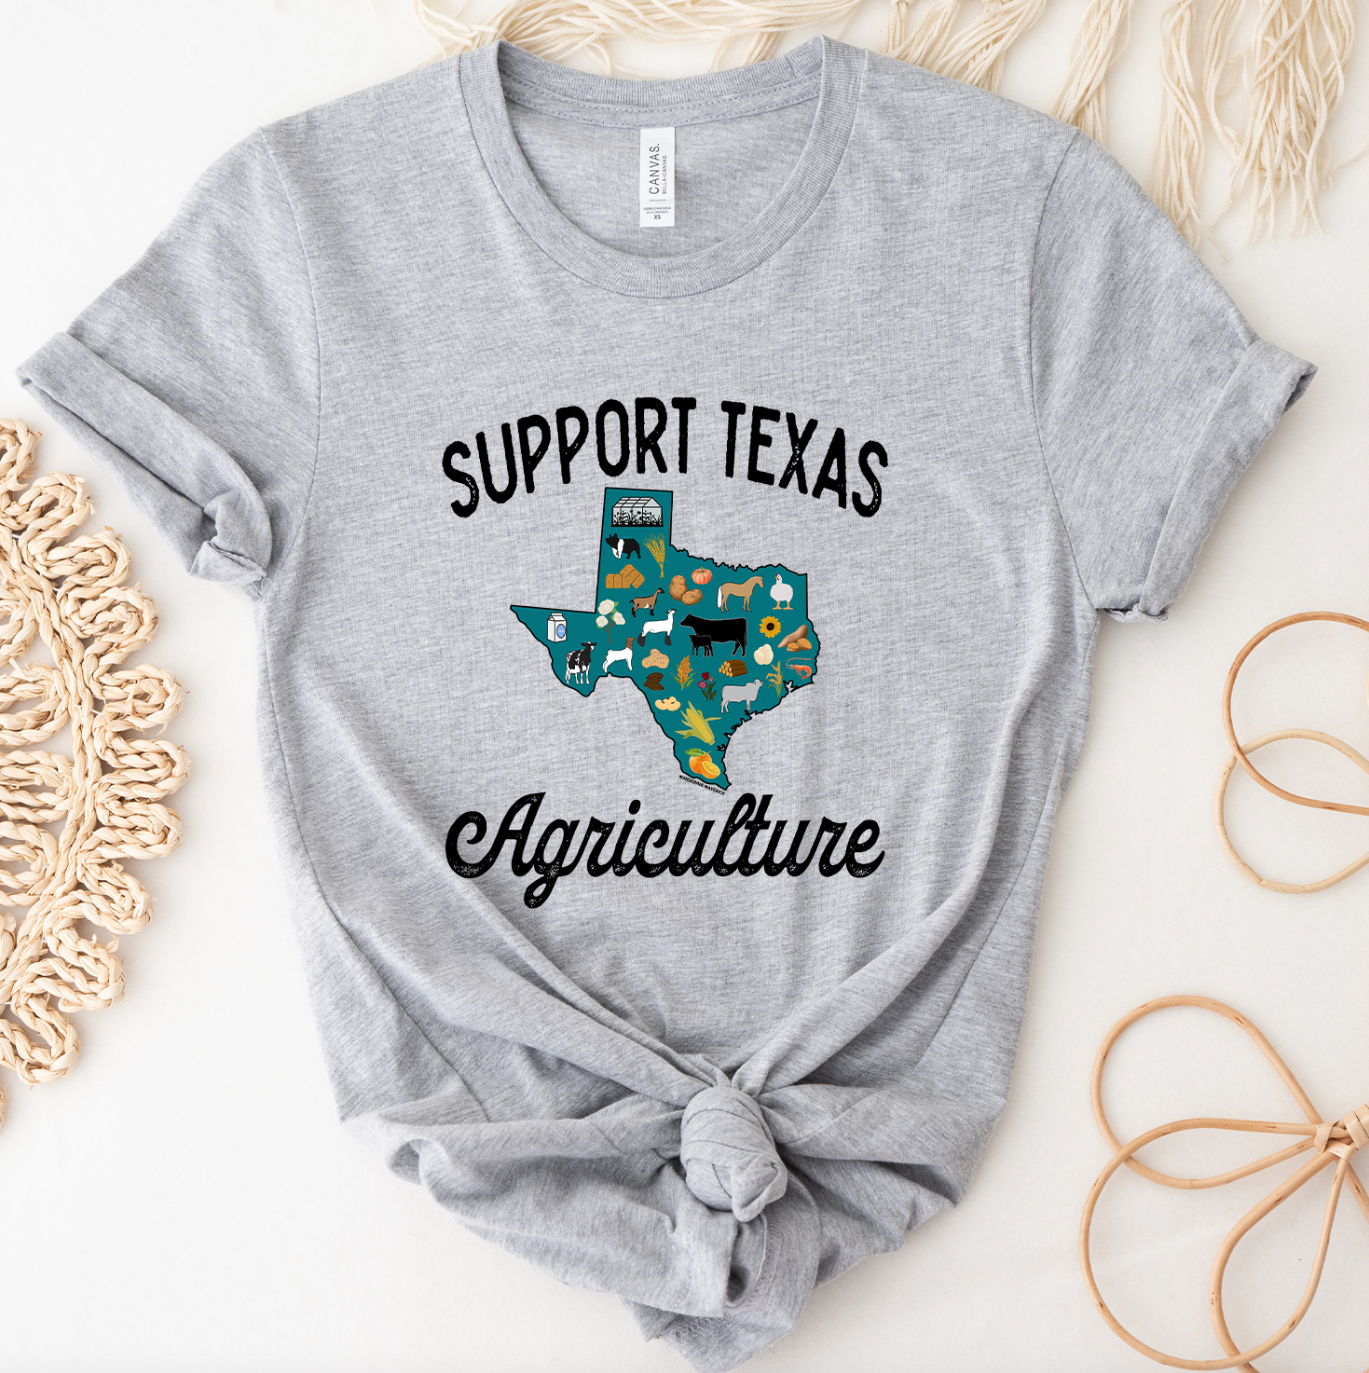 Support Texas Agriculture T-Shirt (XS-4XL) - Multiple Colors!